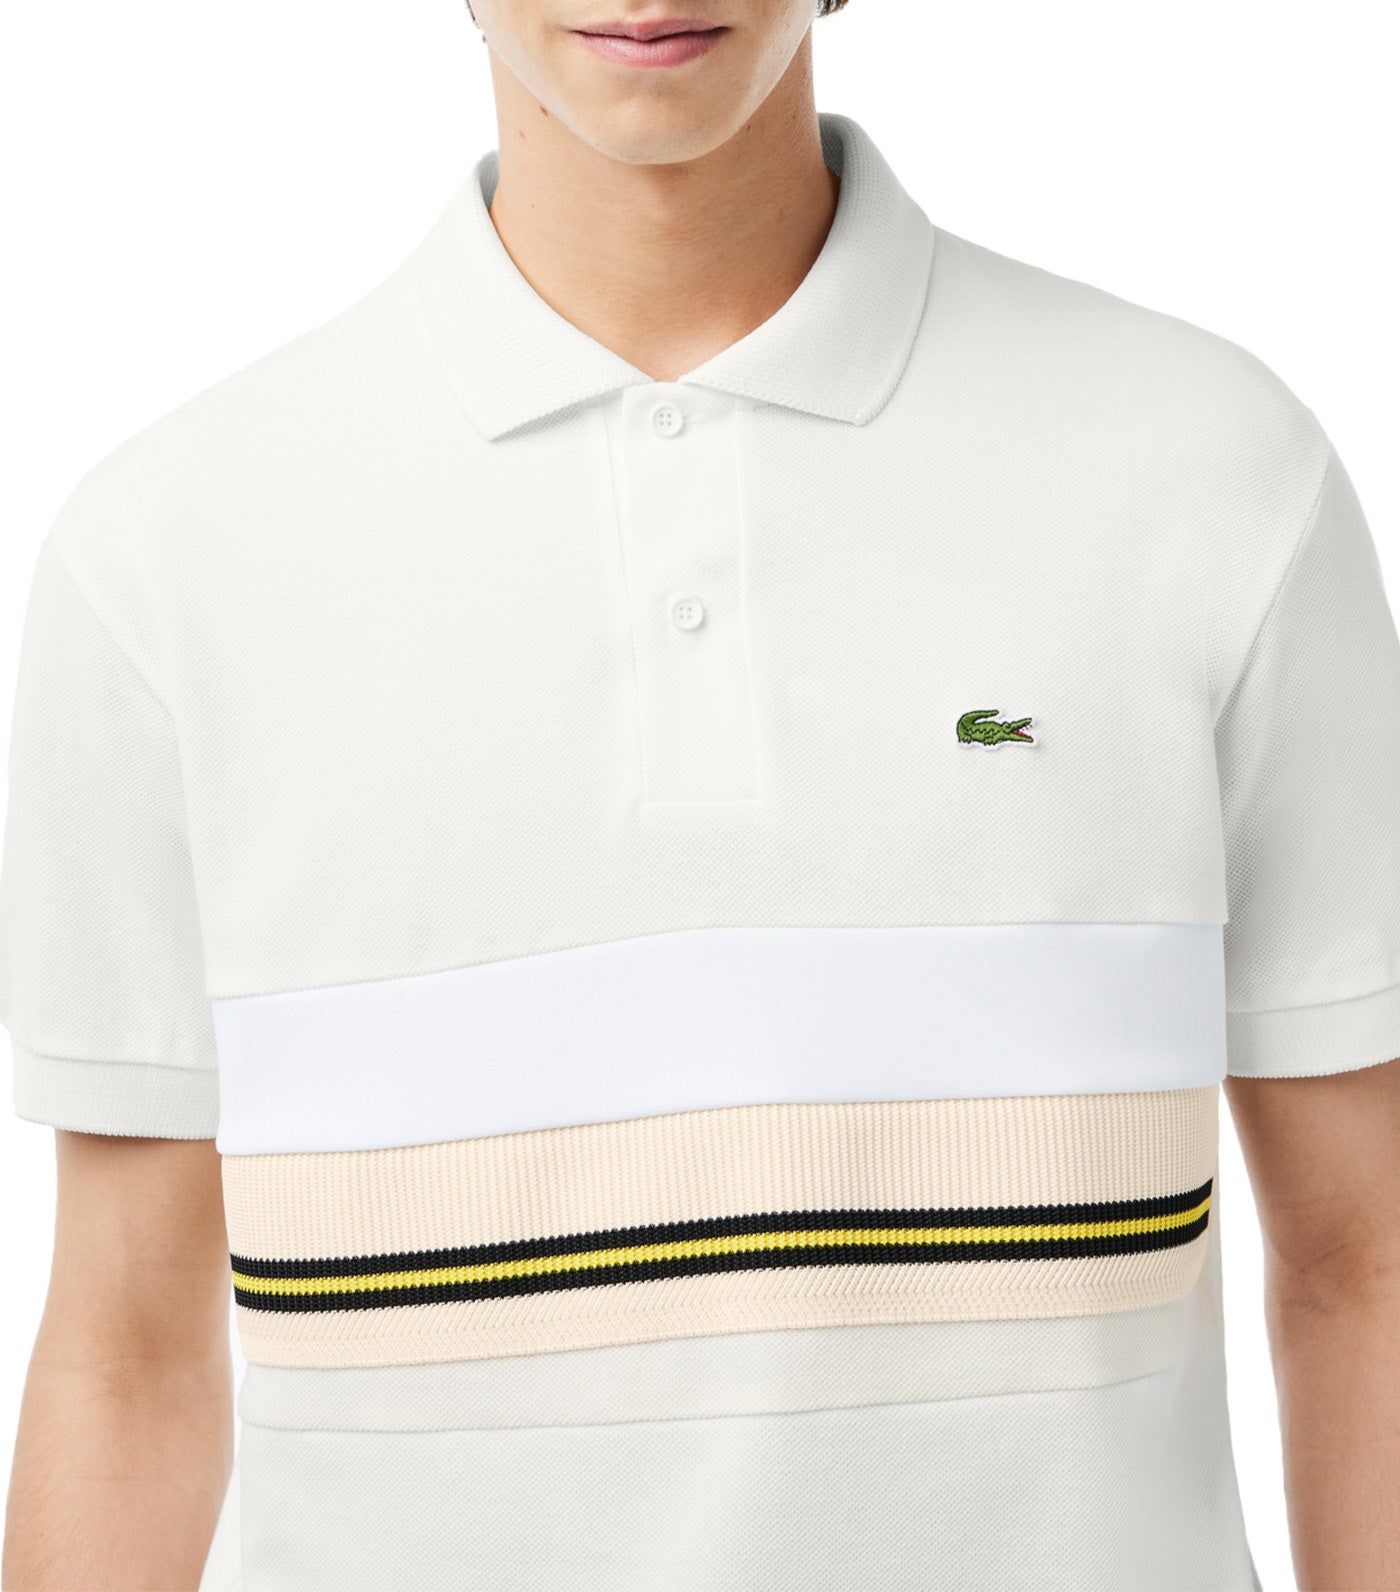 Lacoste French Made Flour Shirt Stripe Contrast Polo